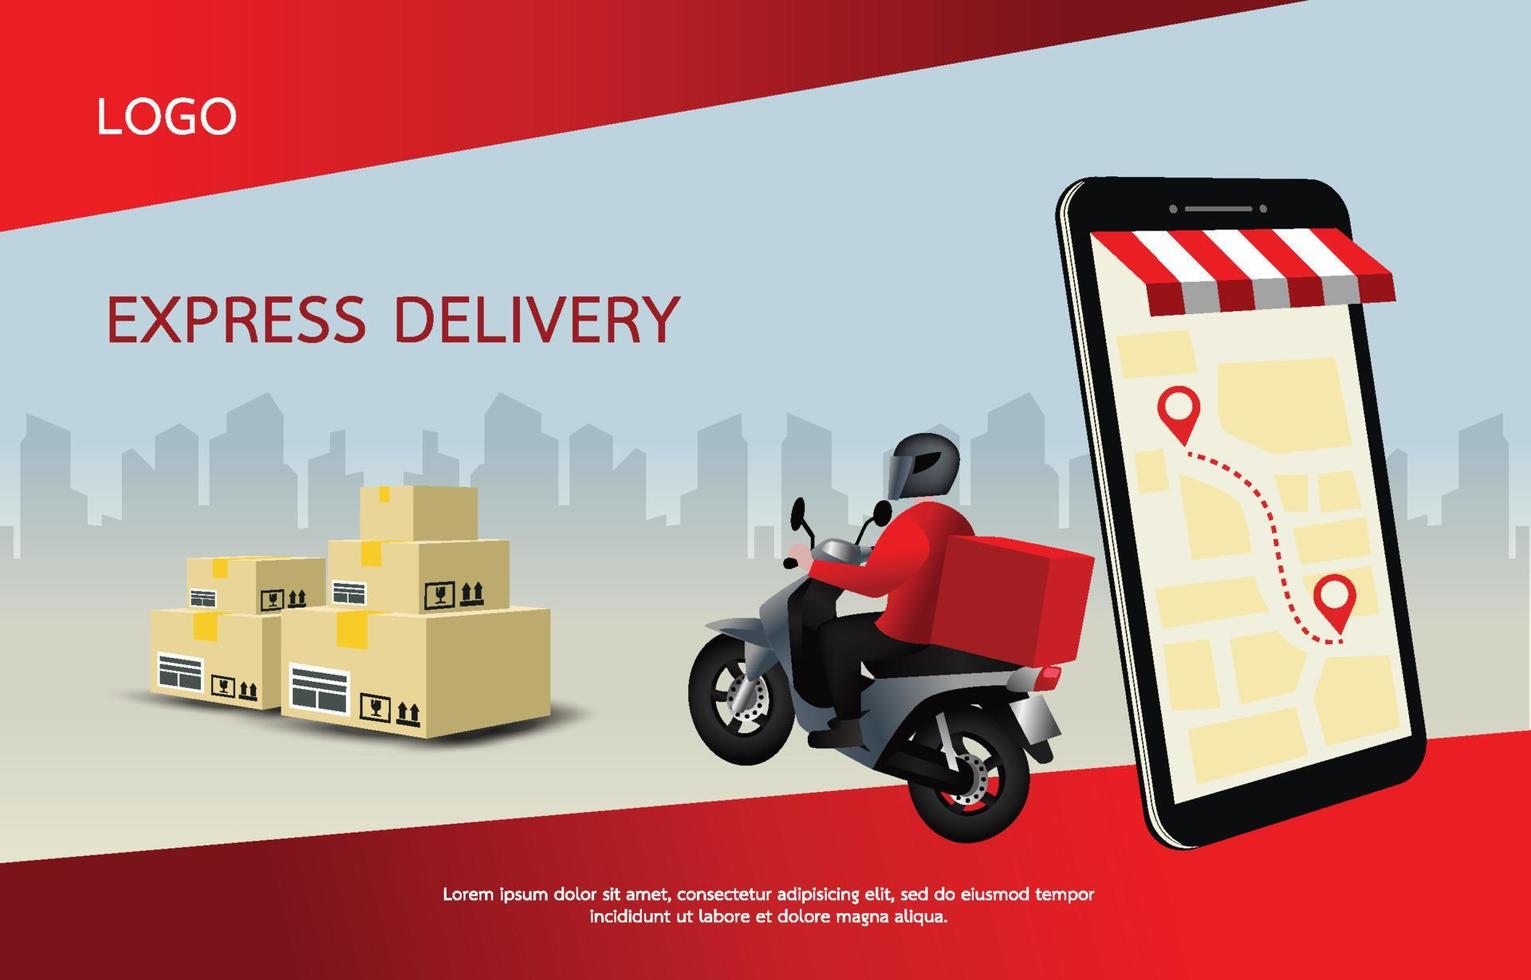 Fast delivery man with motorcycles. Customers ordering on mobile application,The motorcyclist goes according to the GPS map,The background is a cityscape. Illustration vector design for banner.